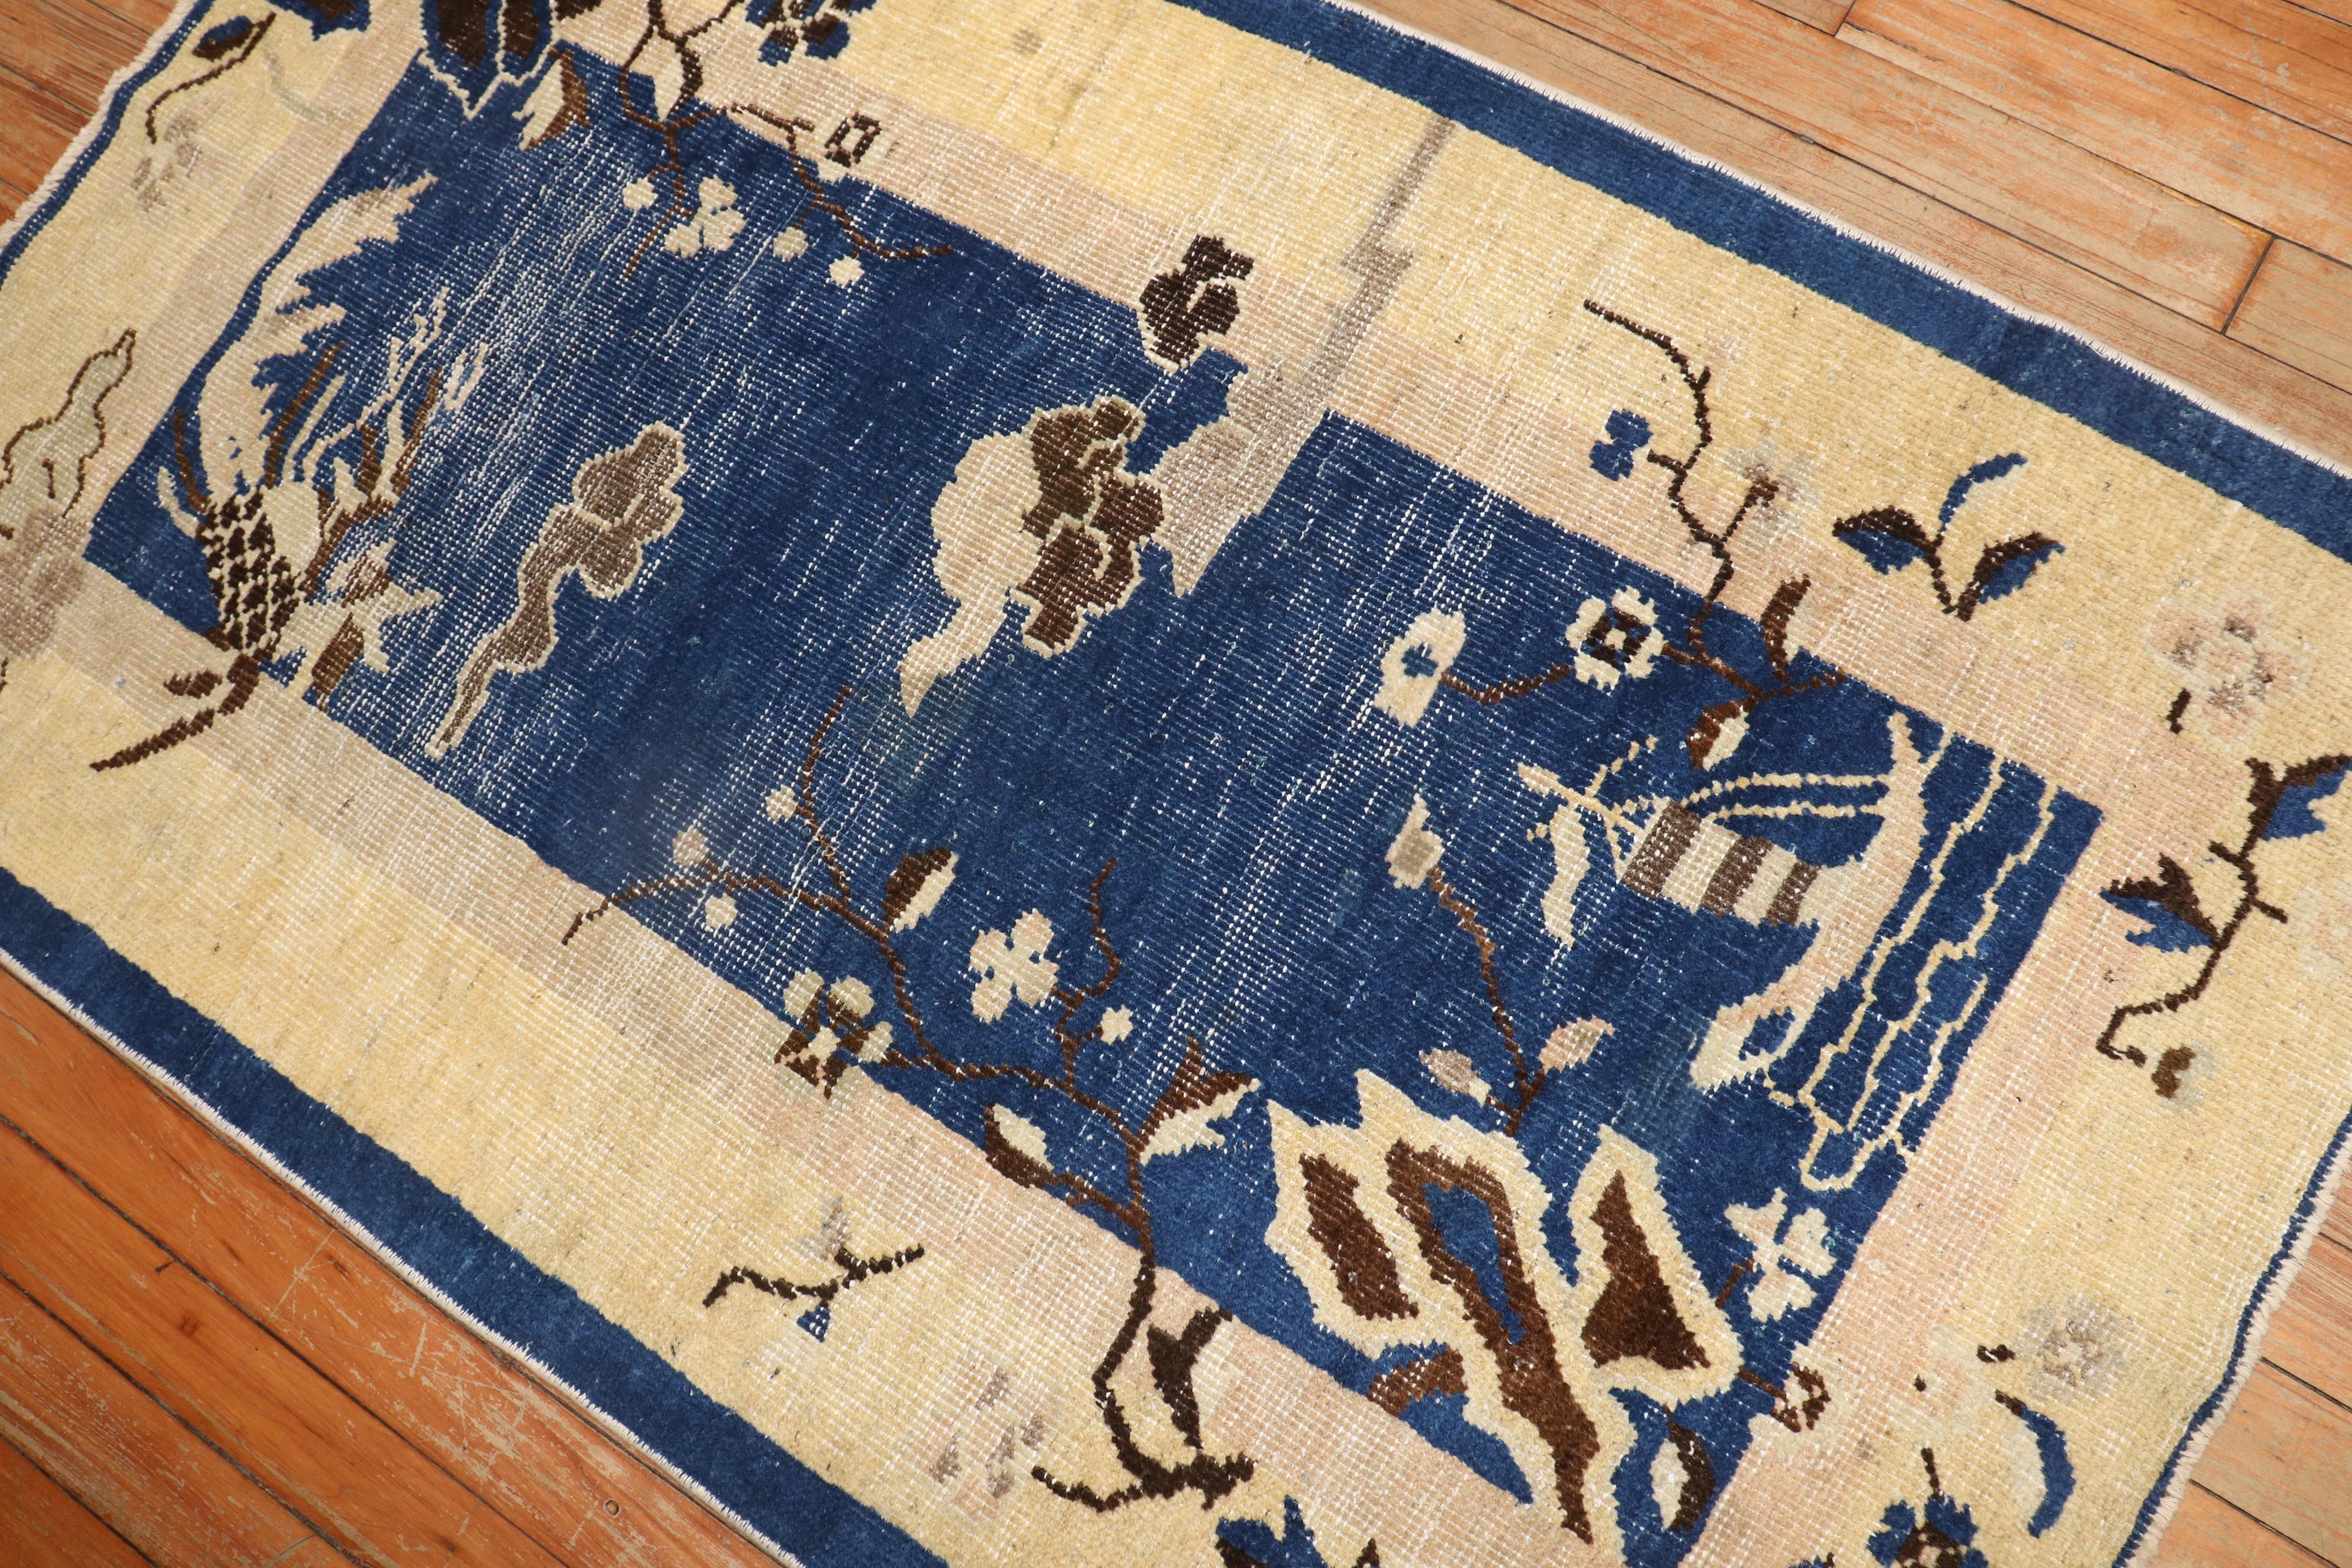 Scatter-size Chinese Peking rug in blue from the 2nd quarter of the 20th century.

Measures: 2'6